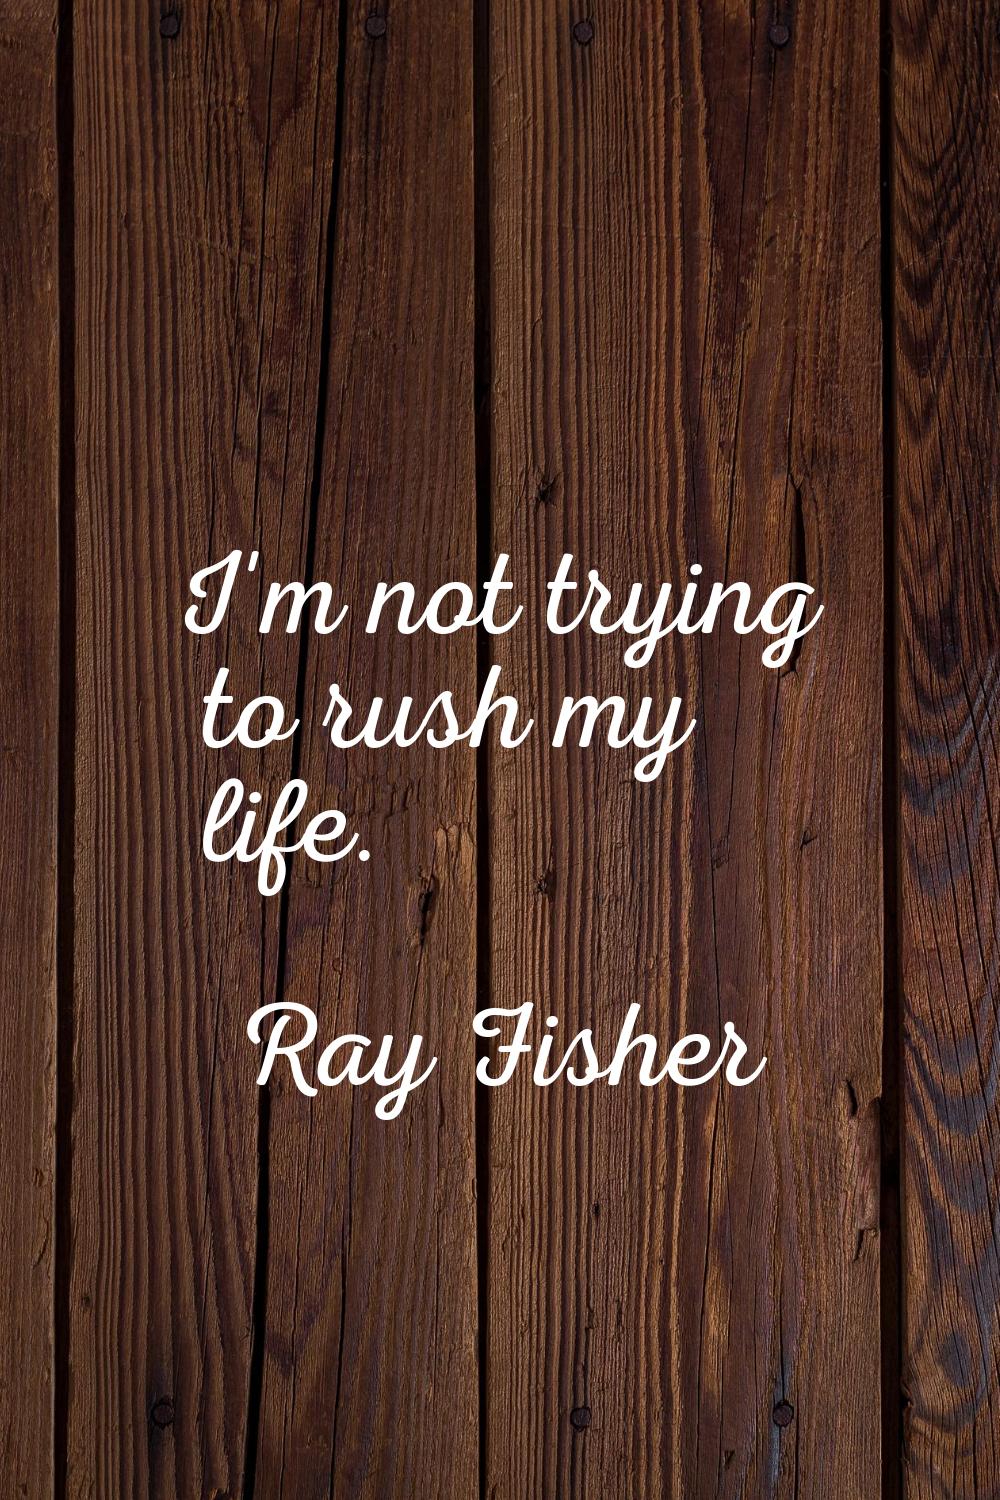 I'm not trying to rush my life.